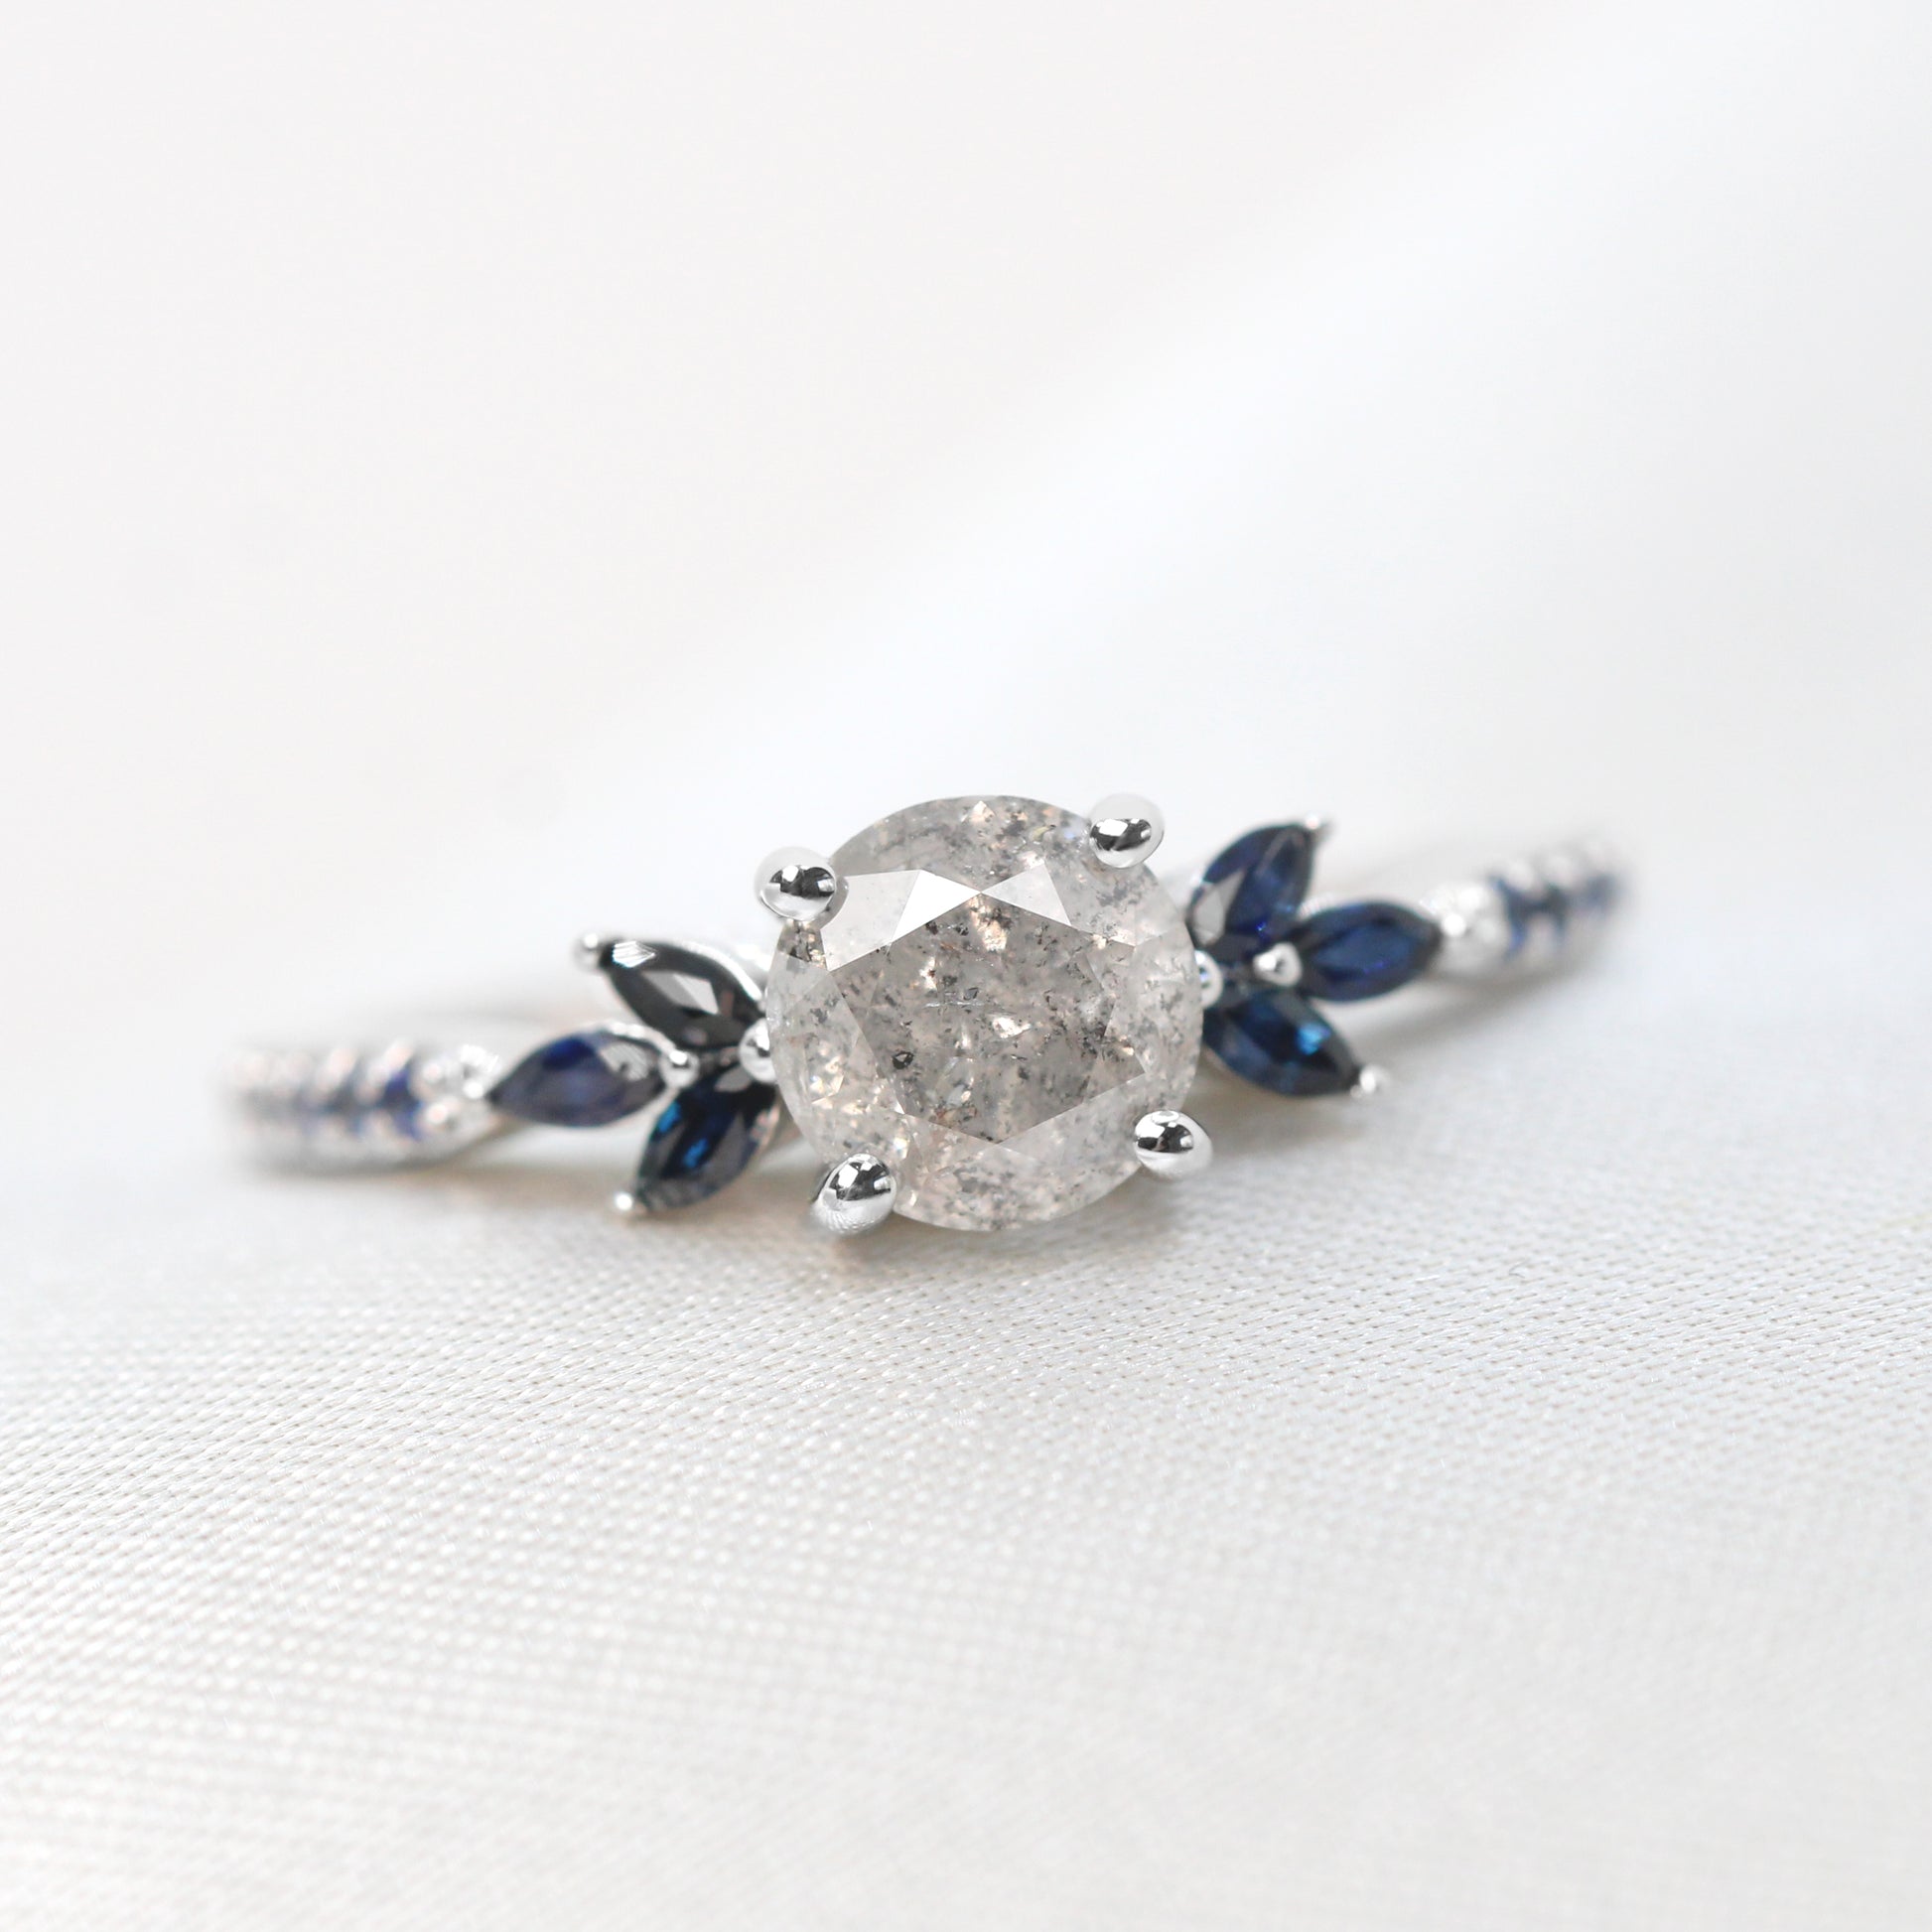 Betty Ring with a 1.11 Carat Round Light Gray Celestial Diamond and Blue Accent Sapphires in 14k White Gold - Ready to Size and Ship - Midwinter Co. Alternative Bridal Rings and Modern Fine Jewelry